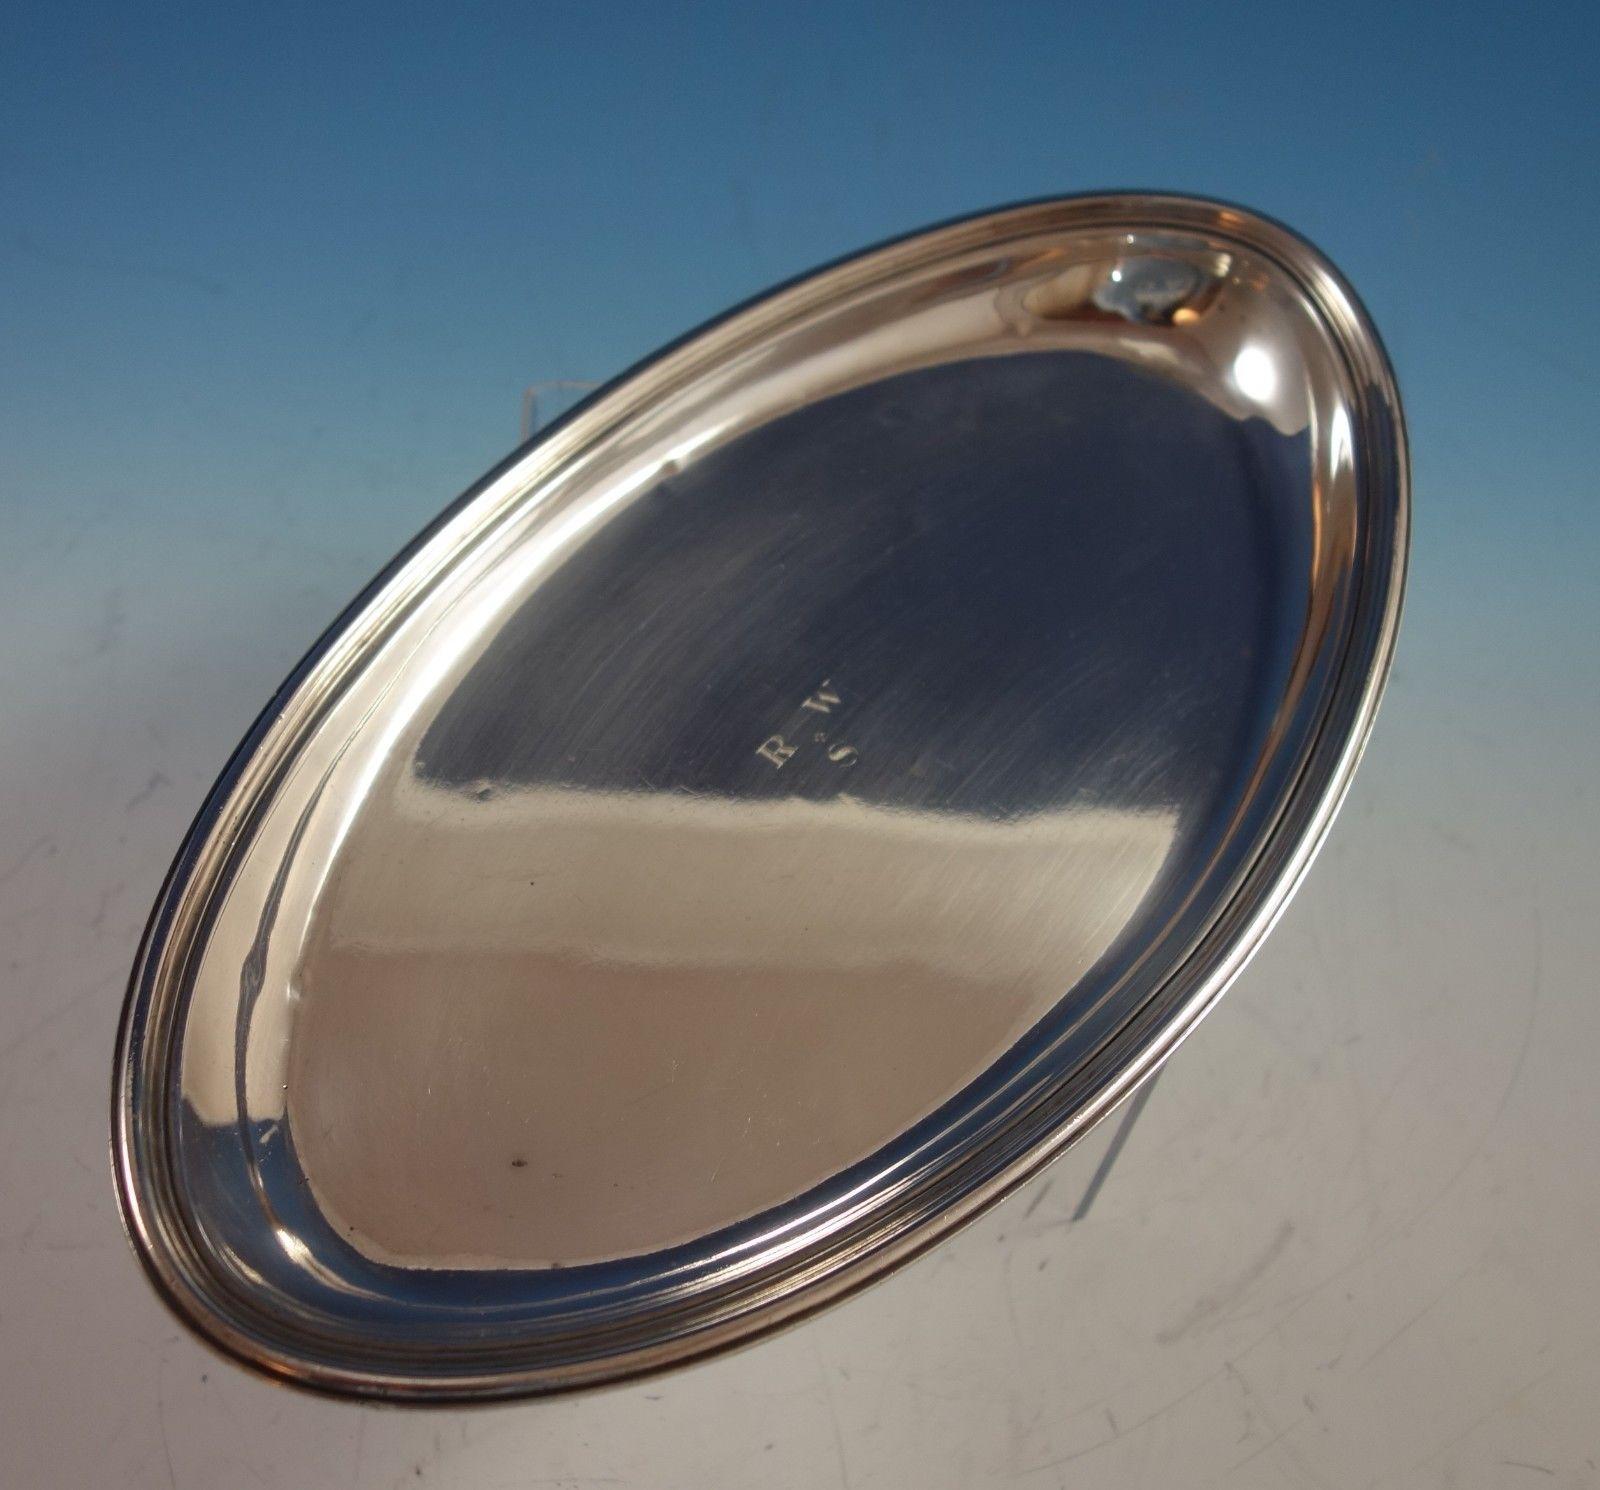 Tiffany & Co. sterling silver oval bread tray. It's marked with #18167 and stylized m for 1907-47. The vintage monogram (see photos) can be removed upon request. The tray measures 1 x 11 5/8 x 6 3/8, and it weighs 14.05 ozt. It is in excellent